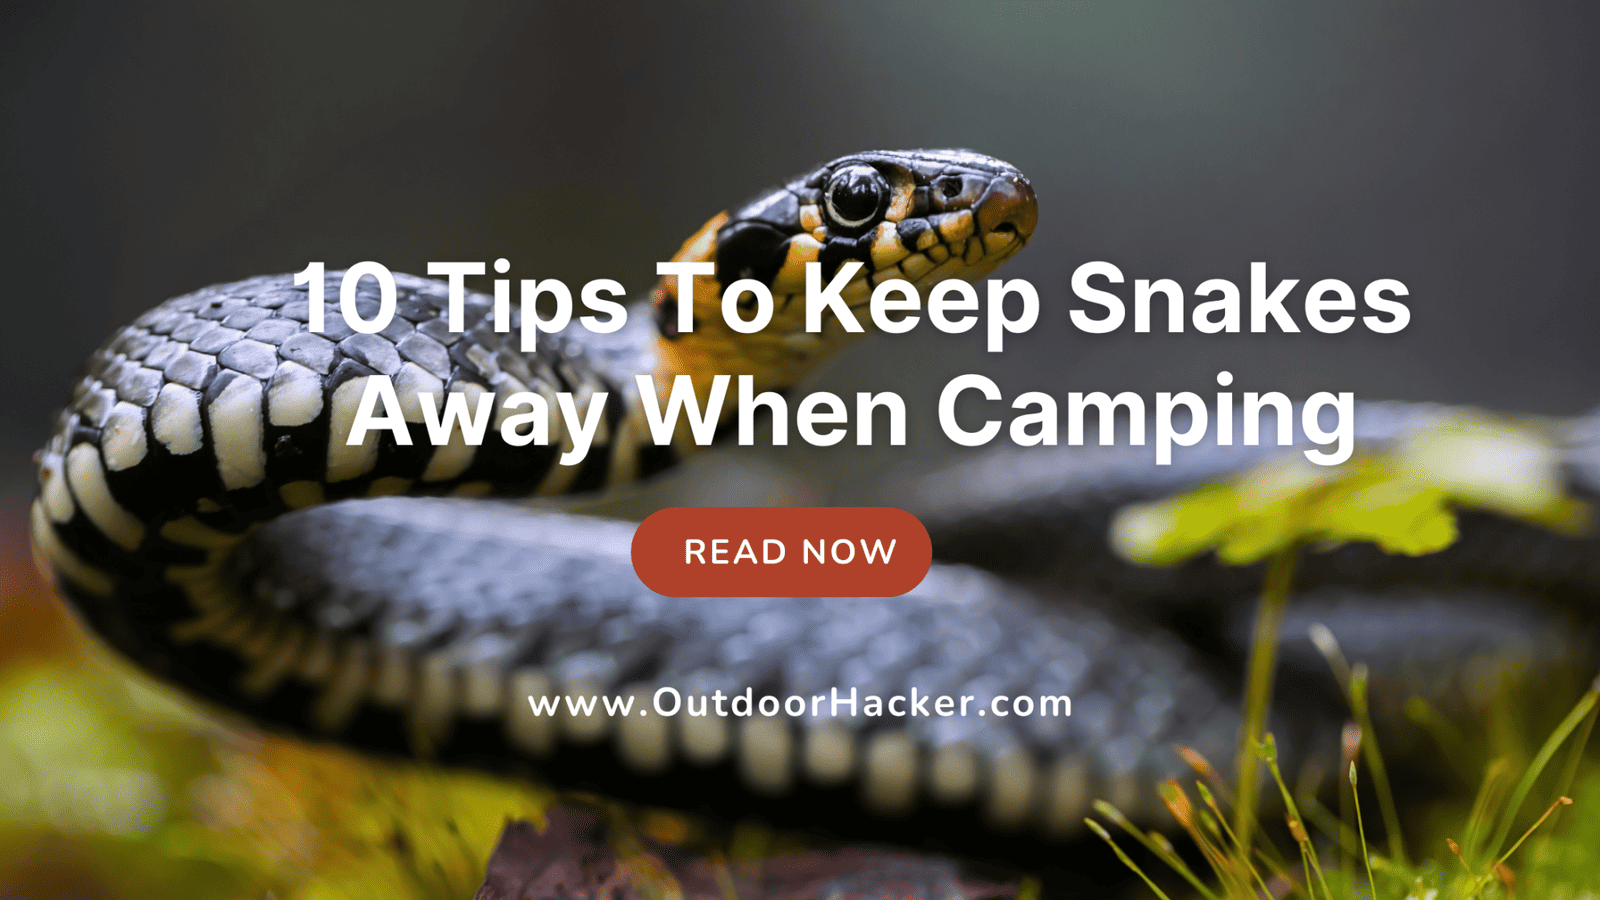 How Can We Keep Snakes Away When Camping